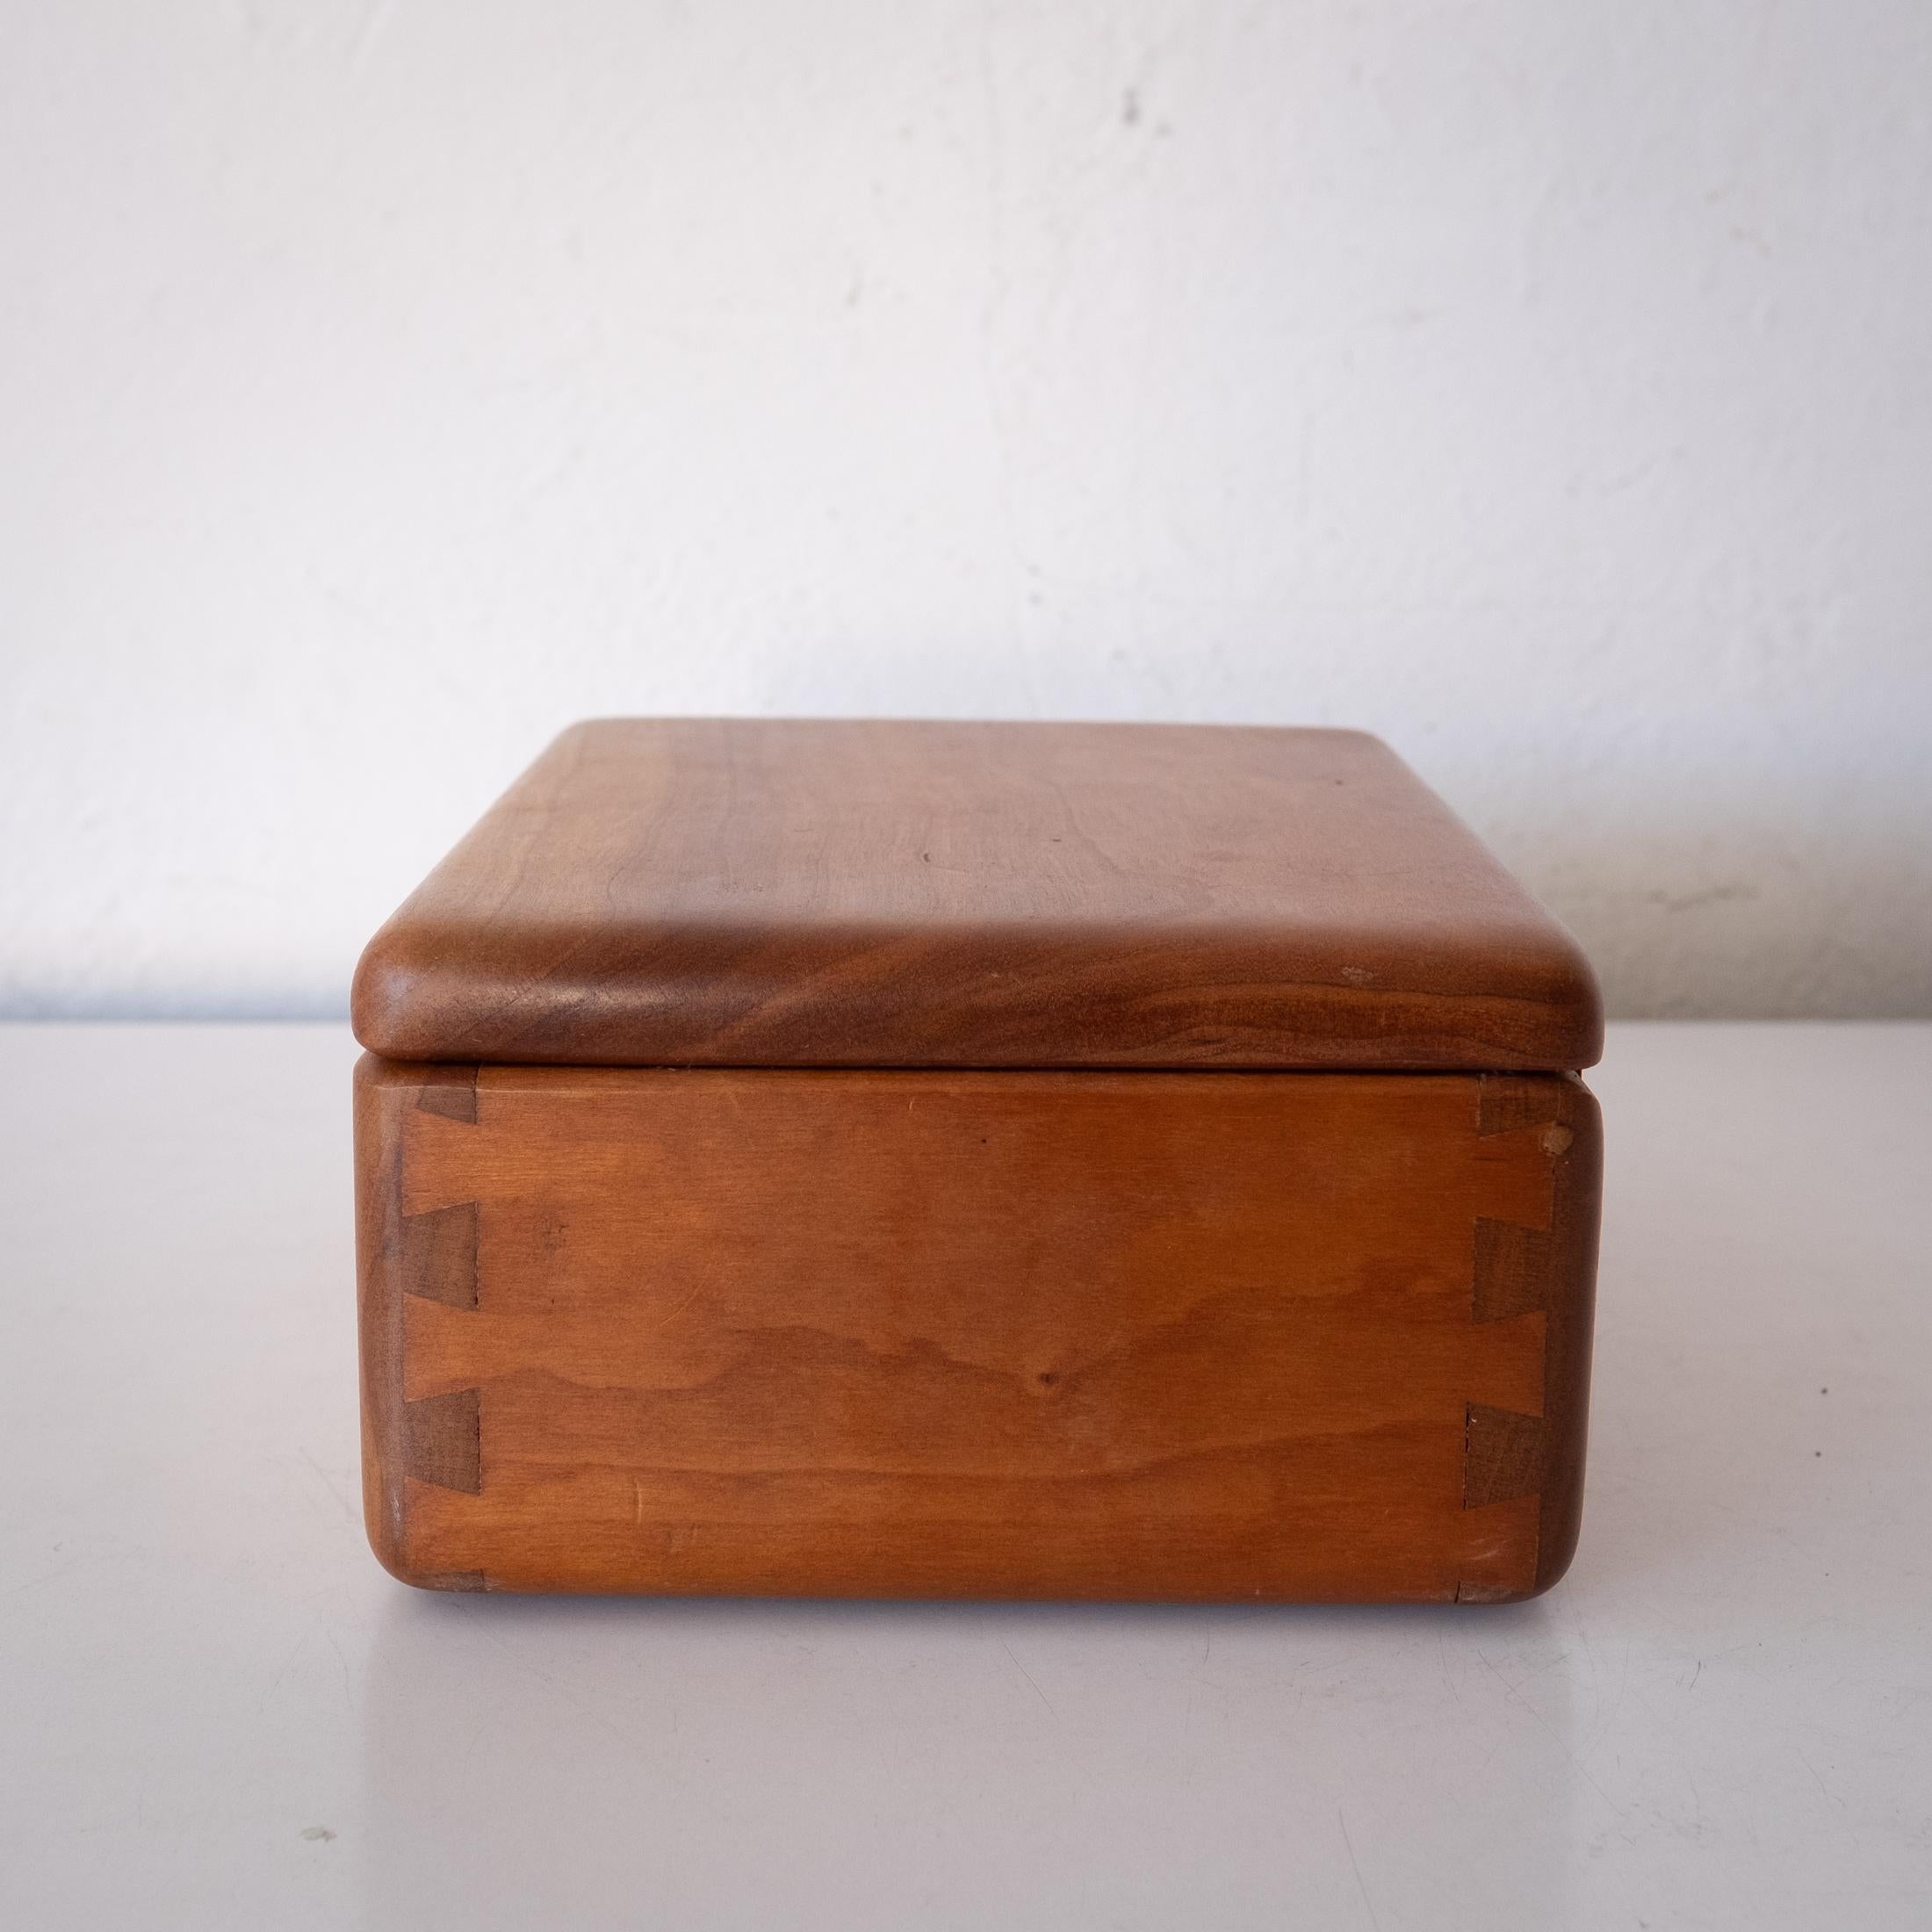 Studio Handcrafted Wood Jewelry Box 1970s For Sale 4